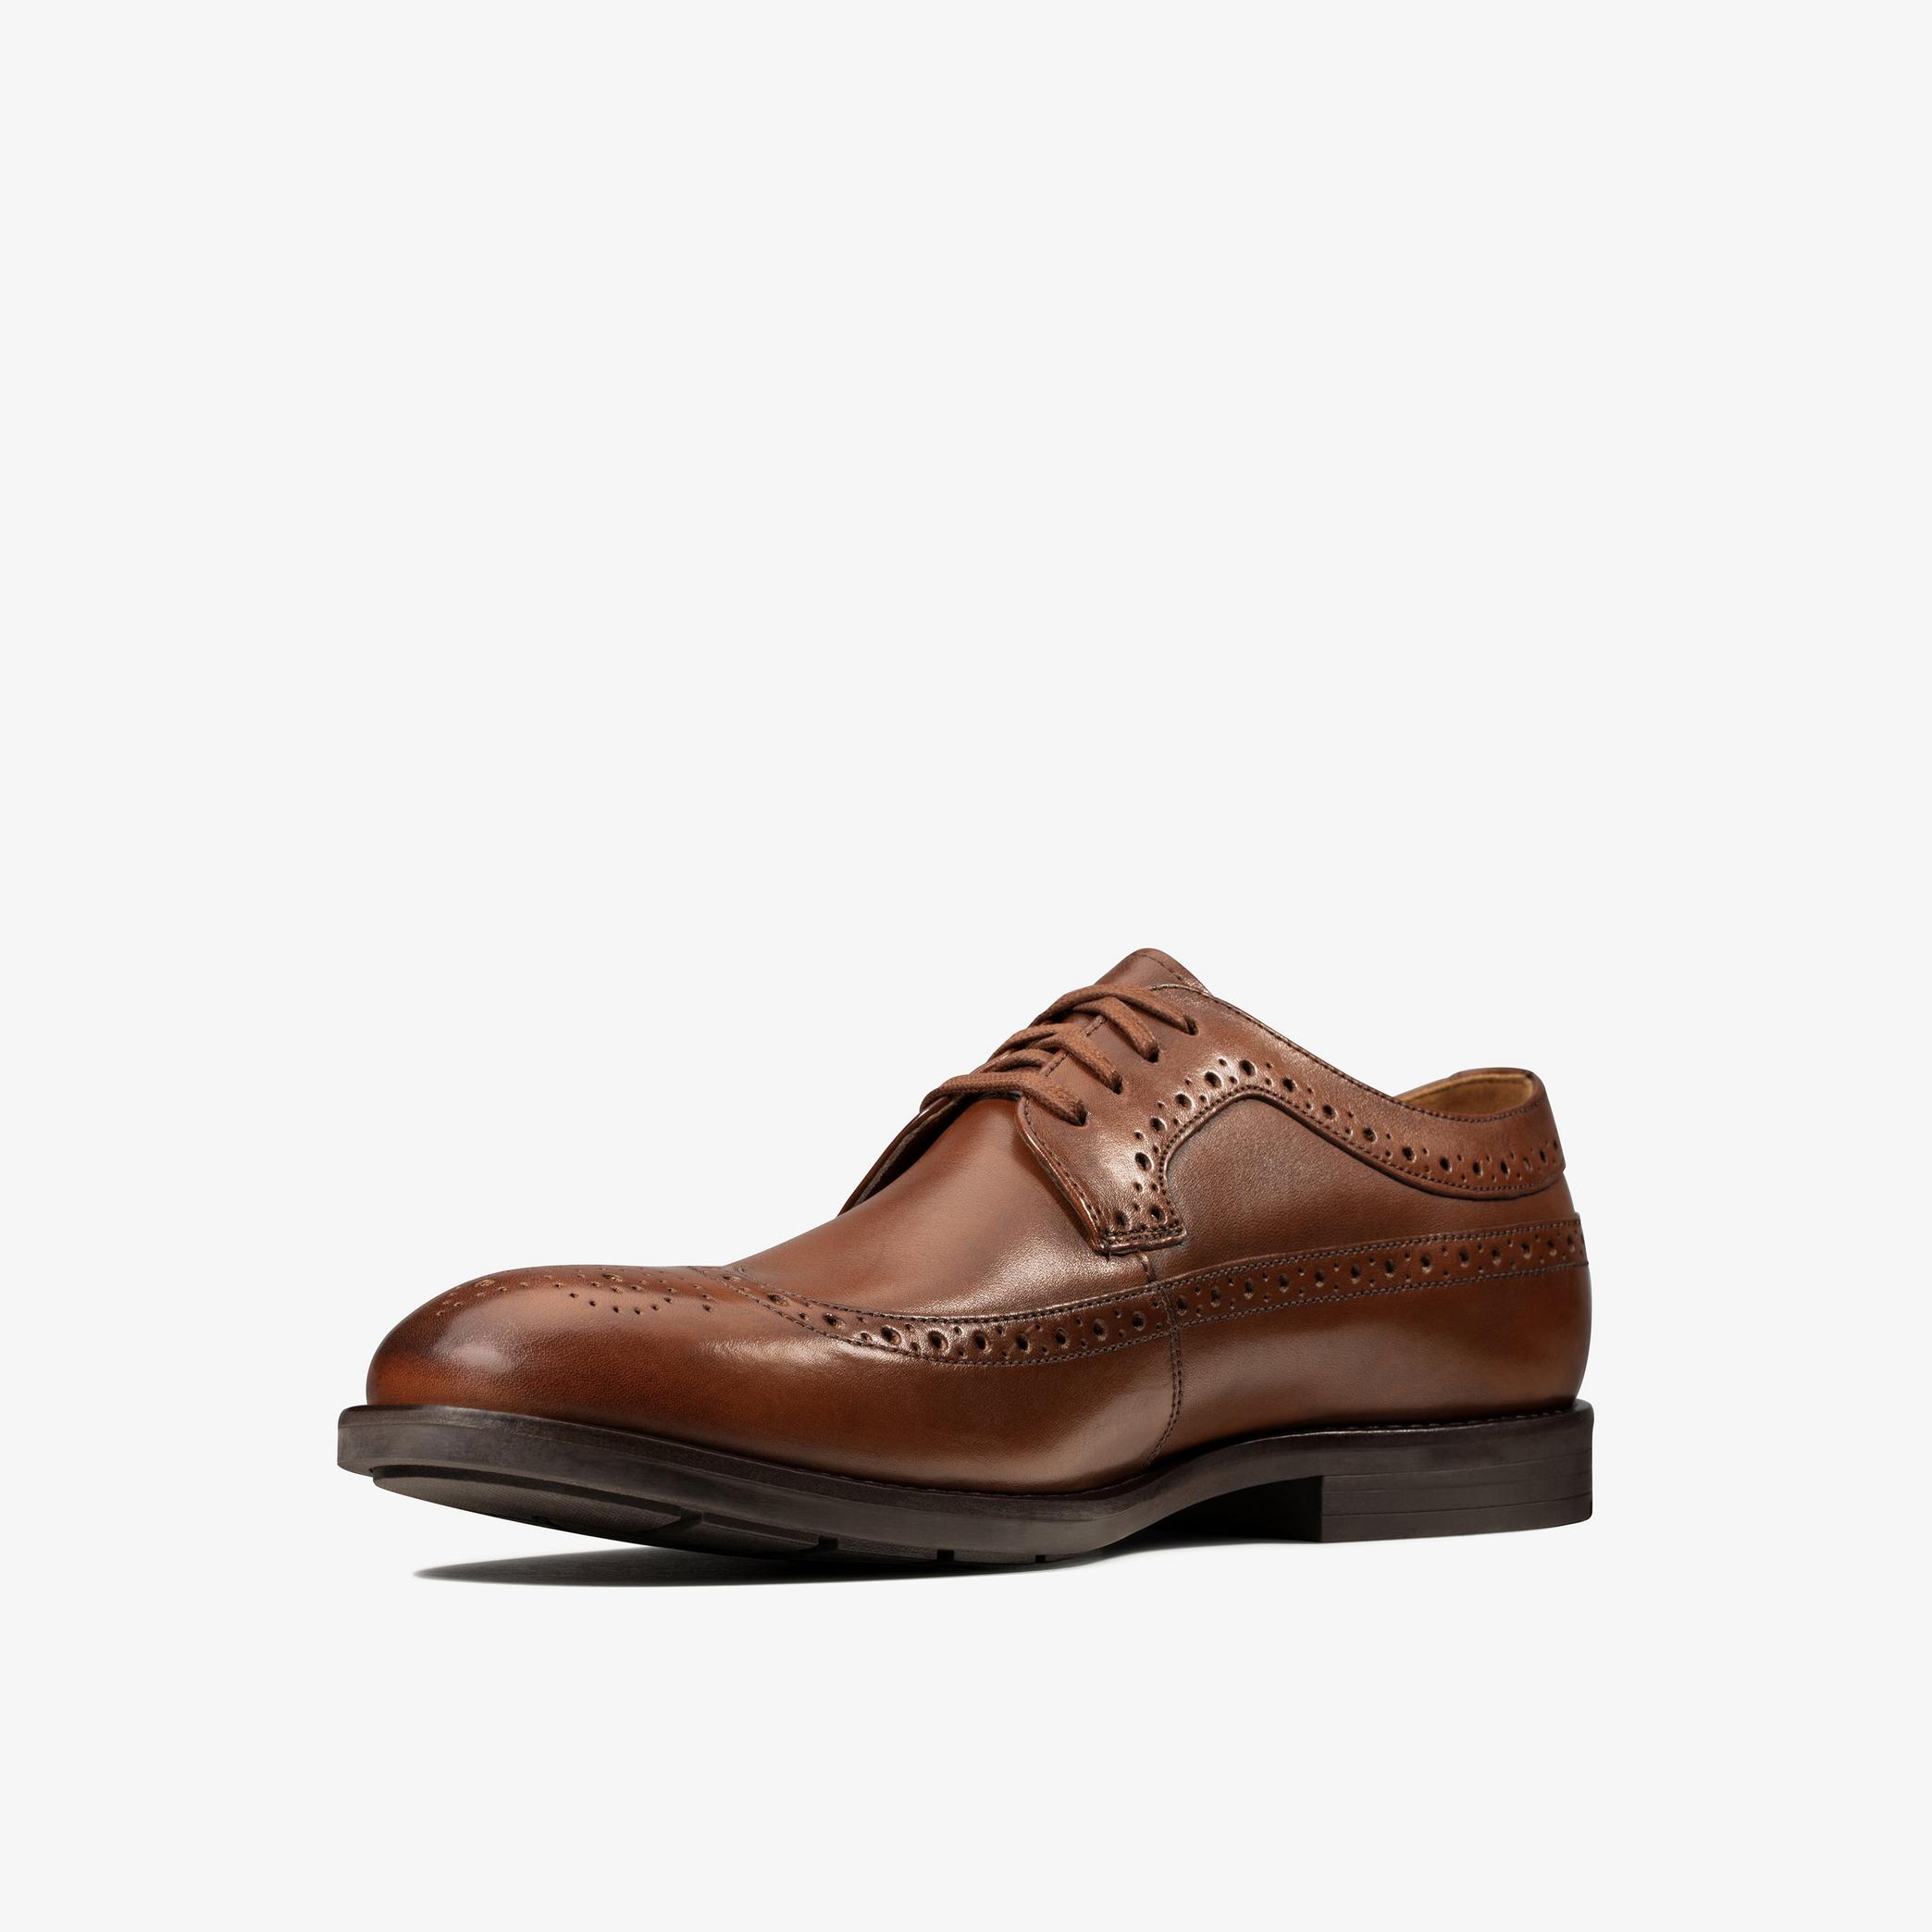 Ronnie Limit British Tan Leather Brogues, view 4 of 6